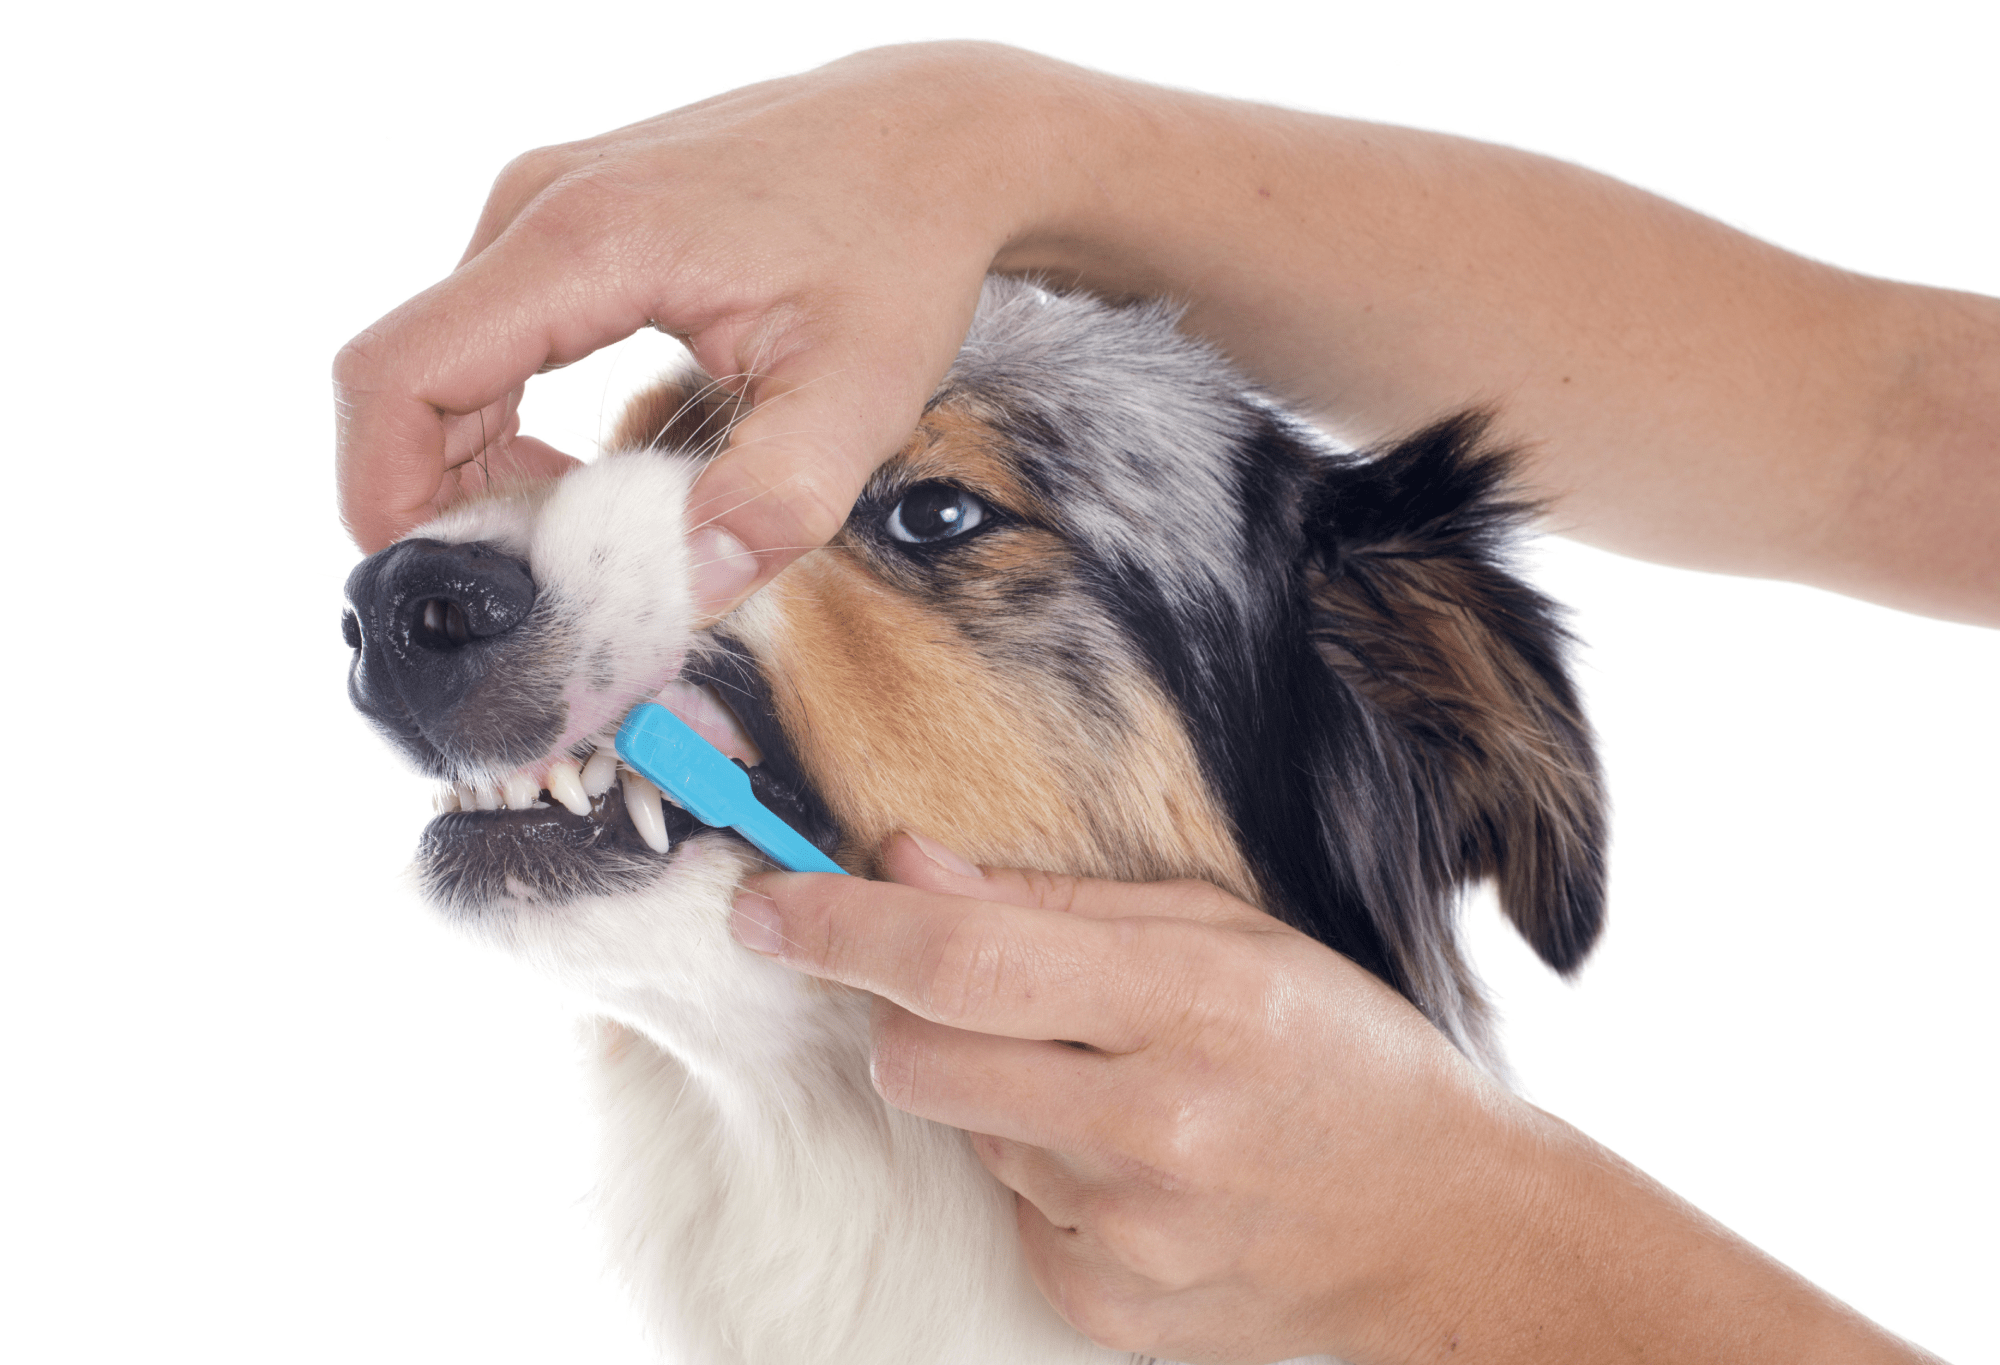 A photo of a dog having their teeth brushed